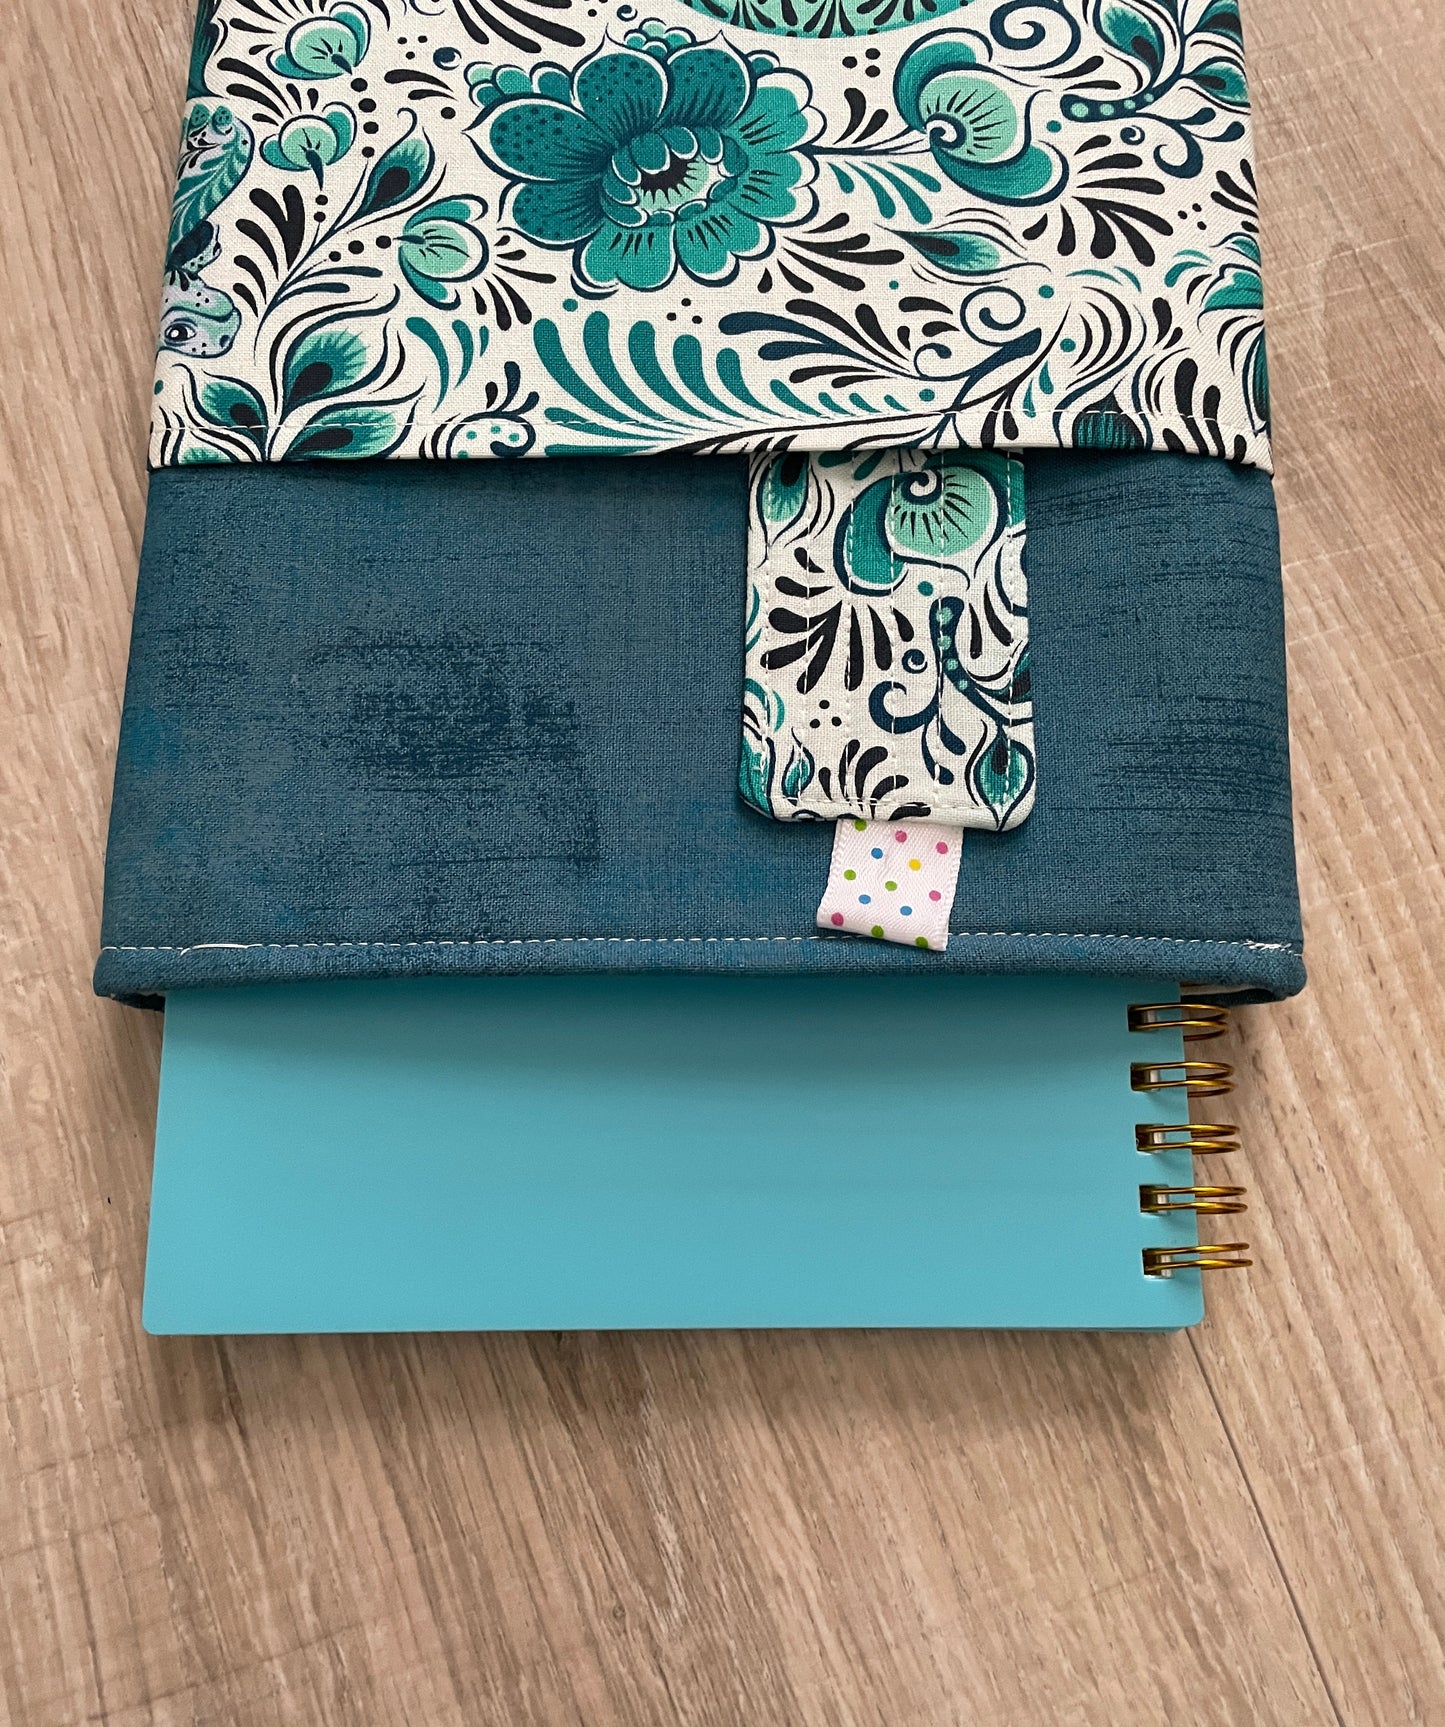 Notebook Sleeve, Lined Journal, and Bookmark, Gift Set